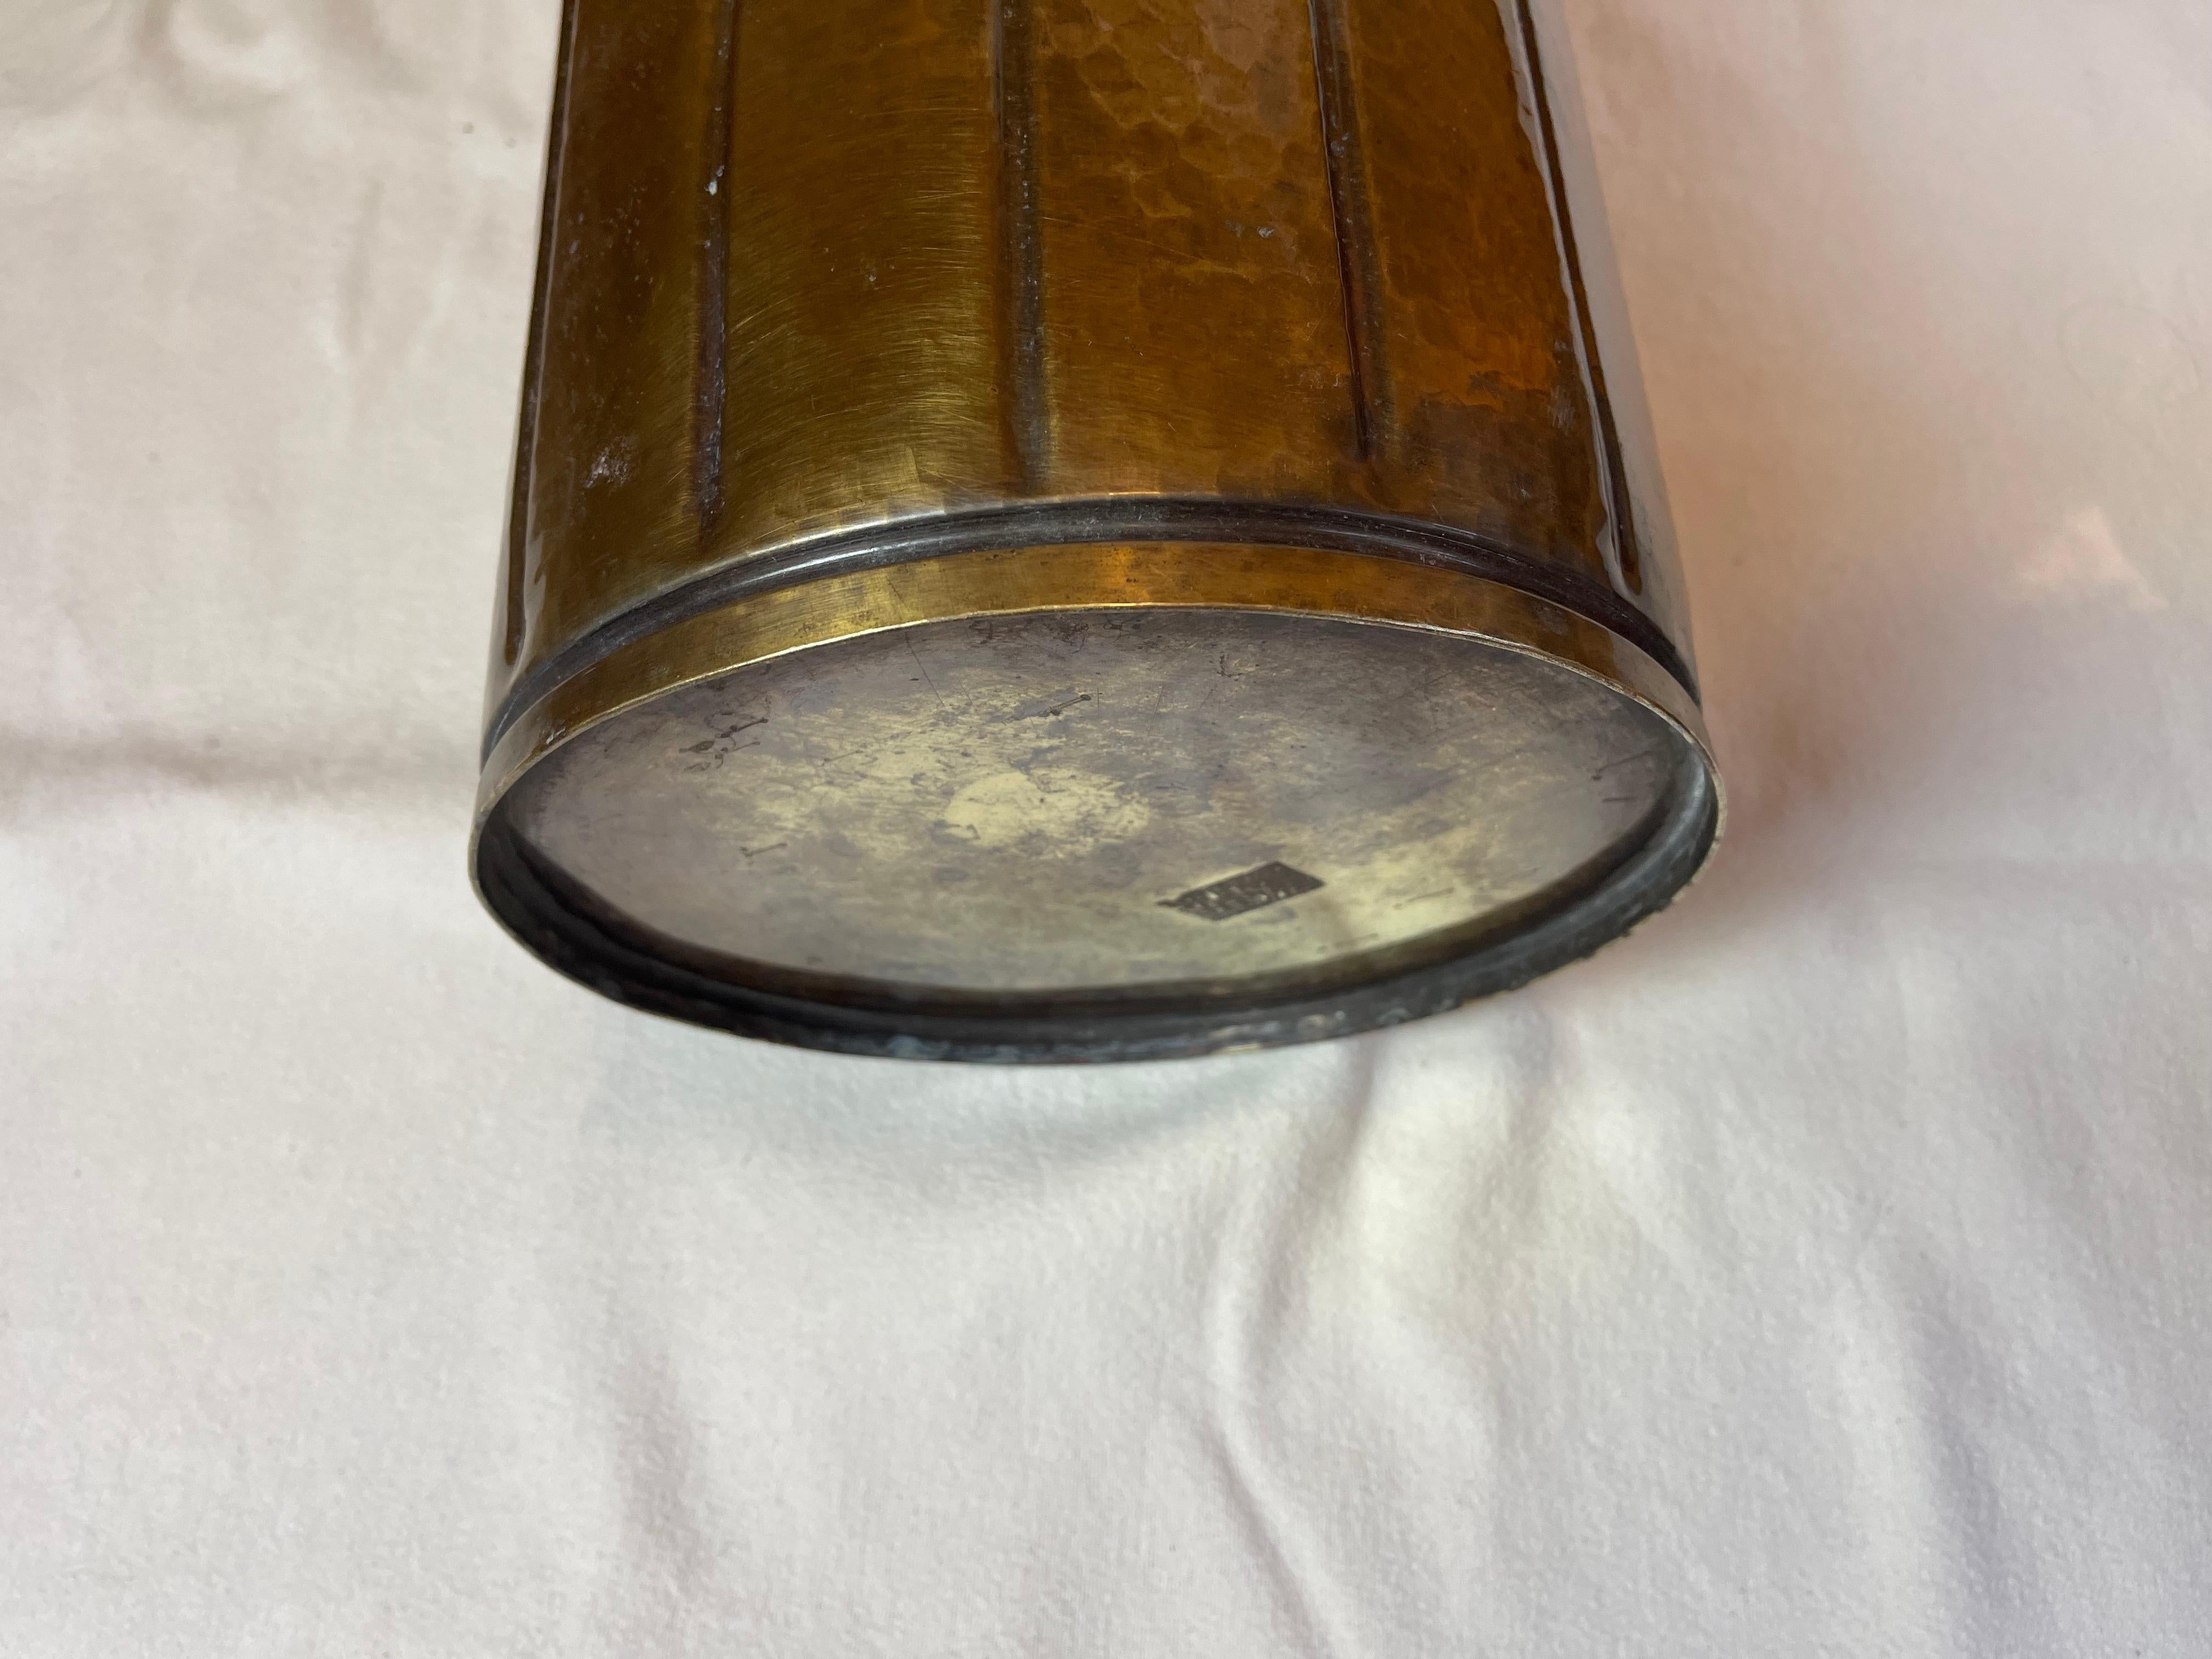 Hollywood Regency Style Umbrella Stand from Hammered Brass, 1950-1970s For Sale 2